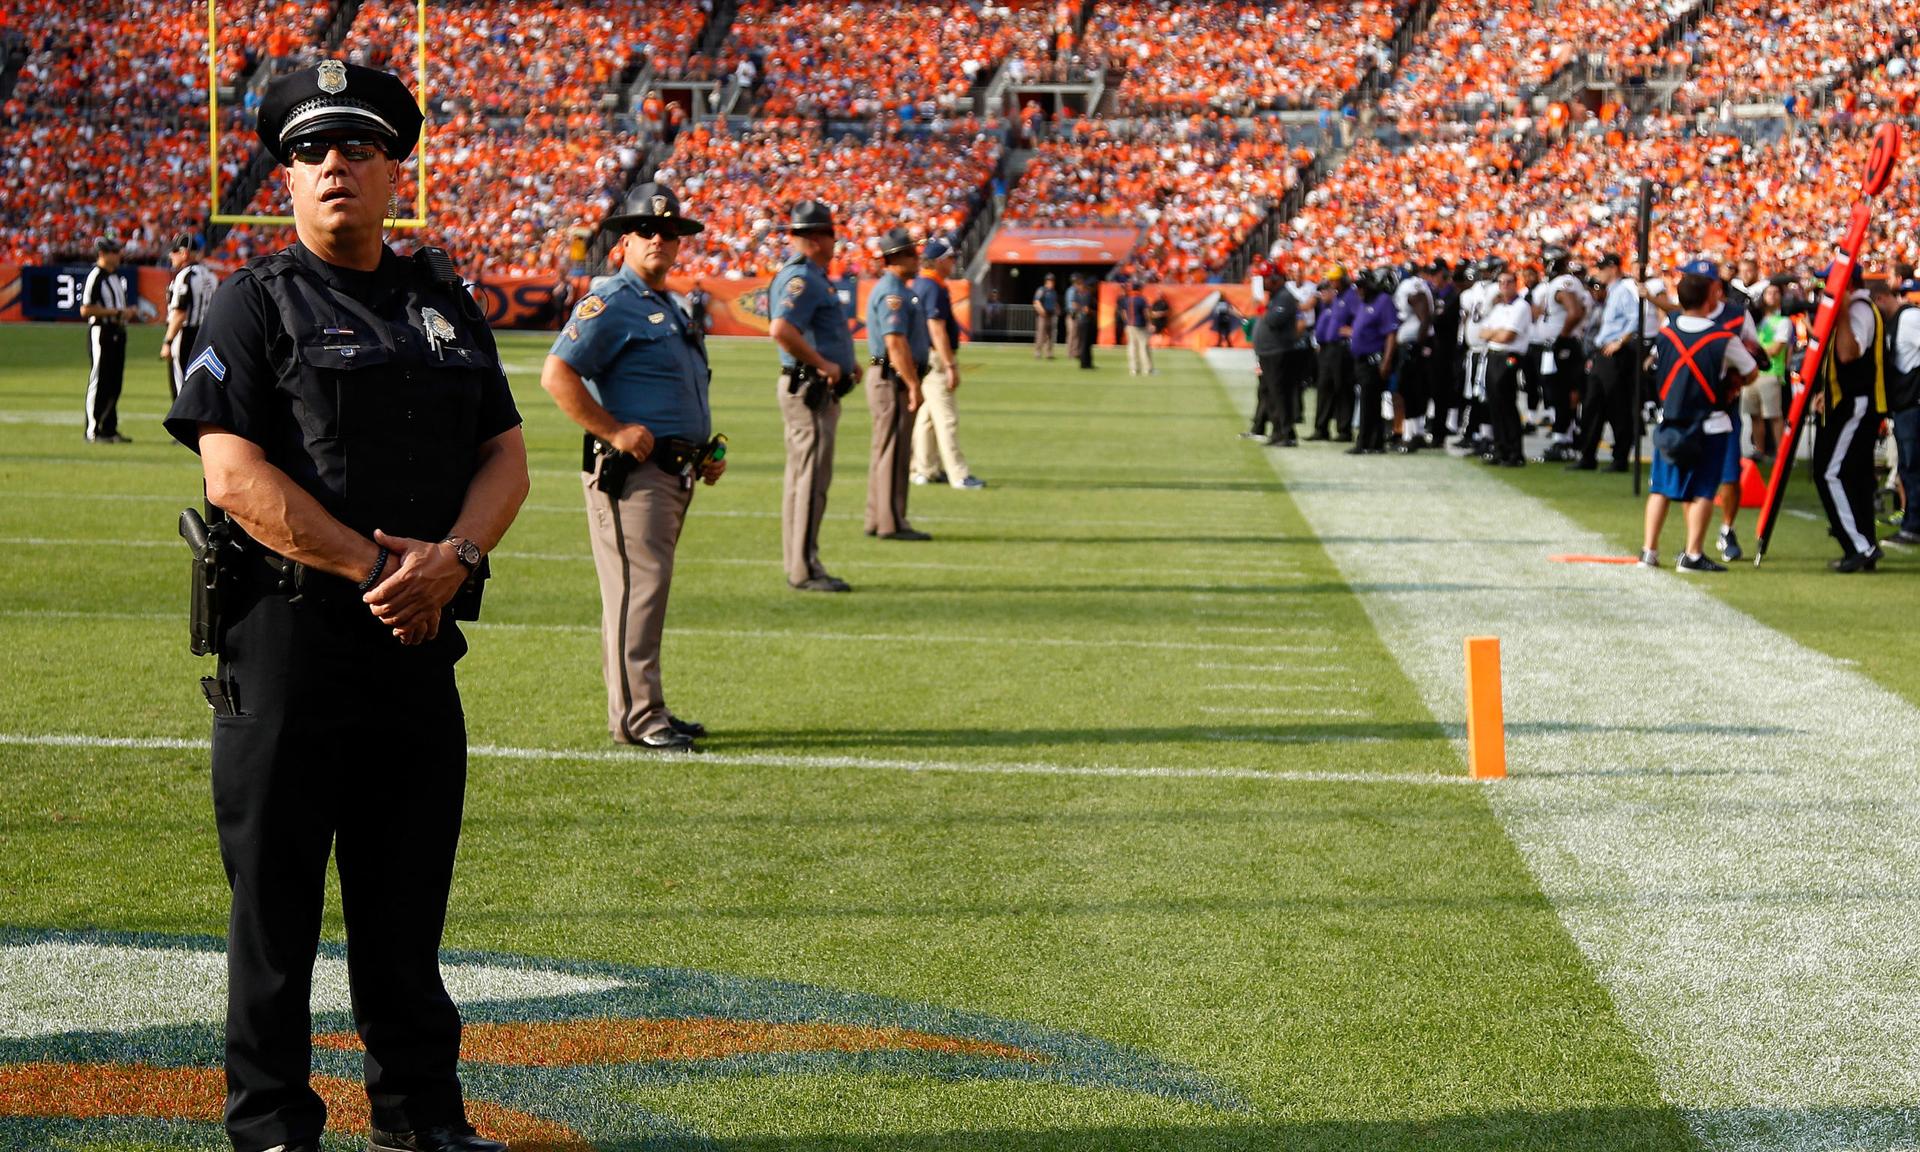 Law enforcement officers help secure a 2015 NFL game between the Baltimore Ravens and the Denver Broncos. (Photo by Doug Pensinger/Getty Images)